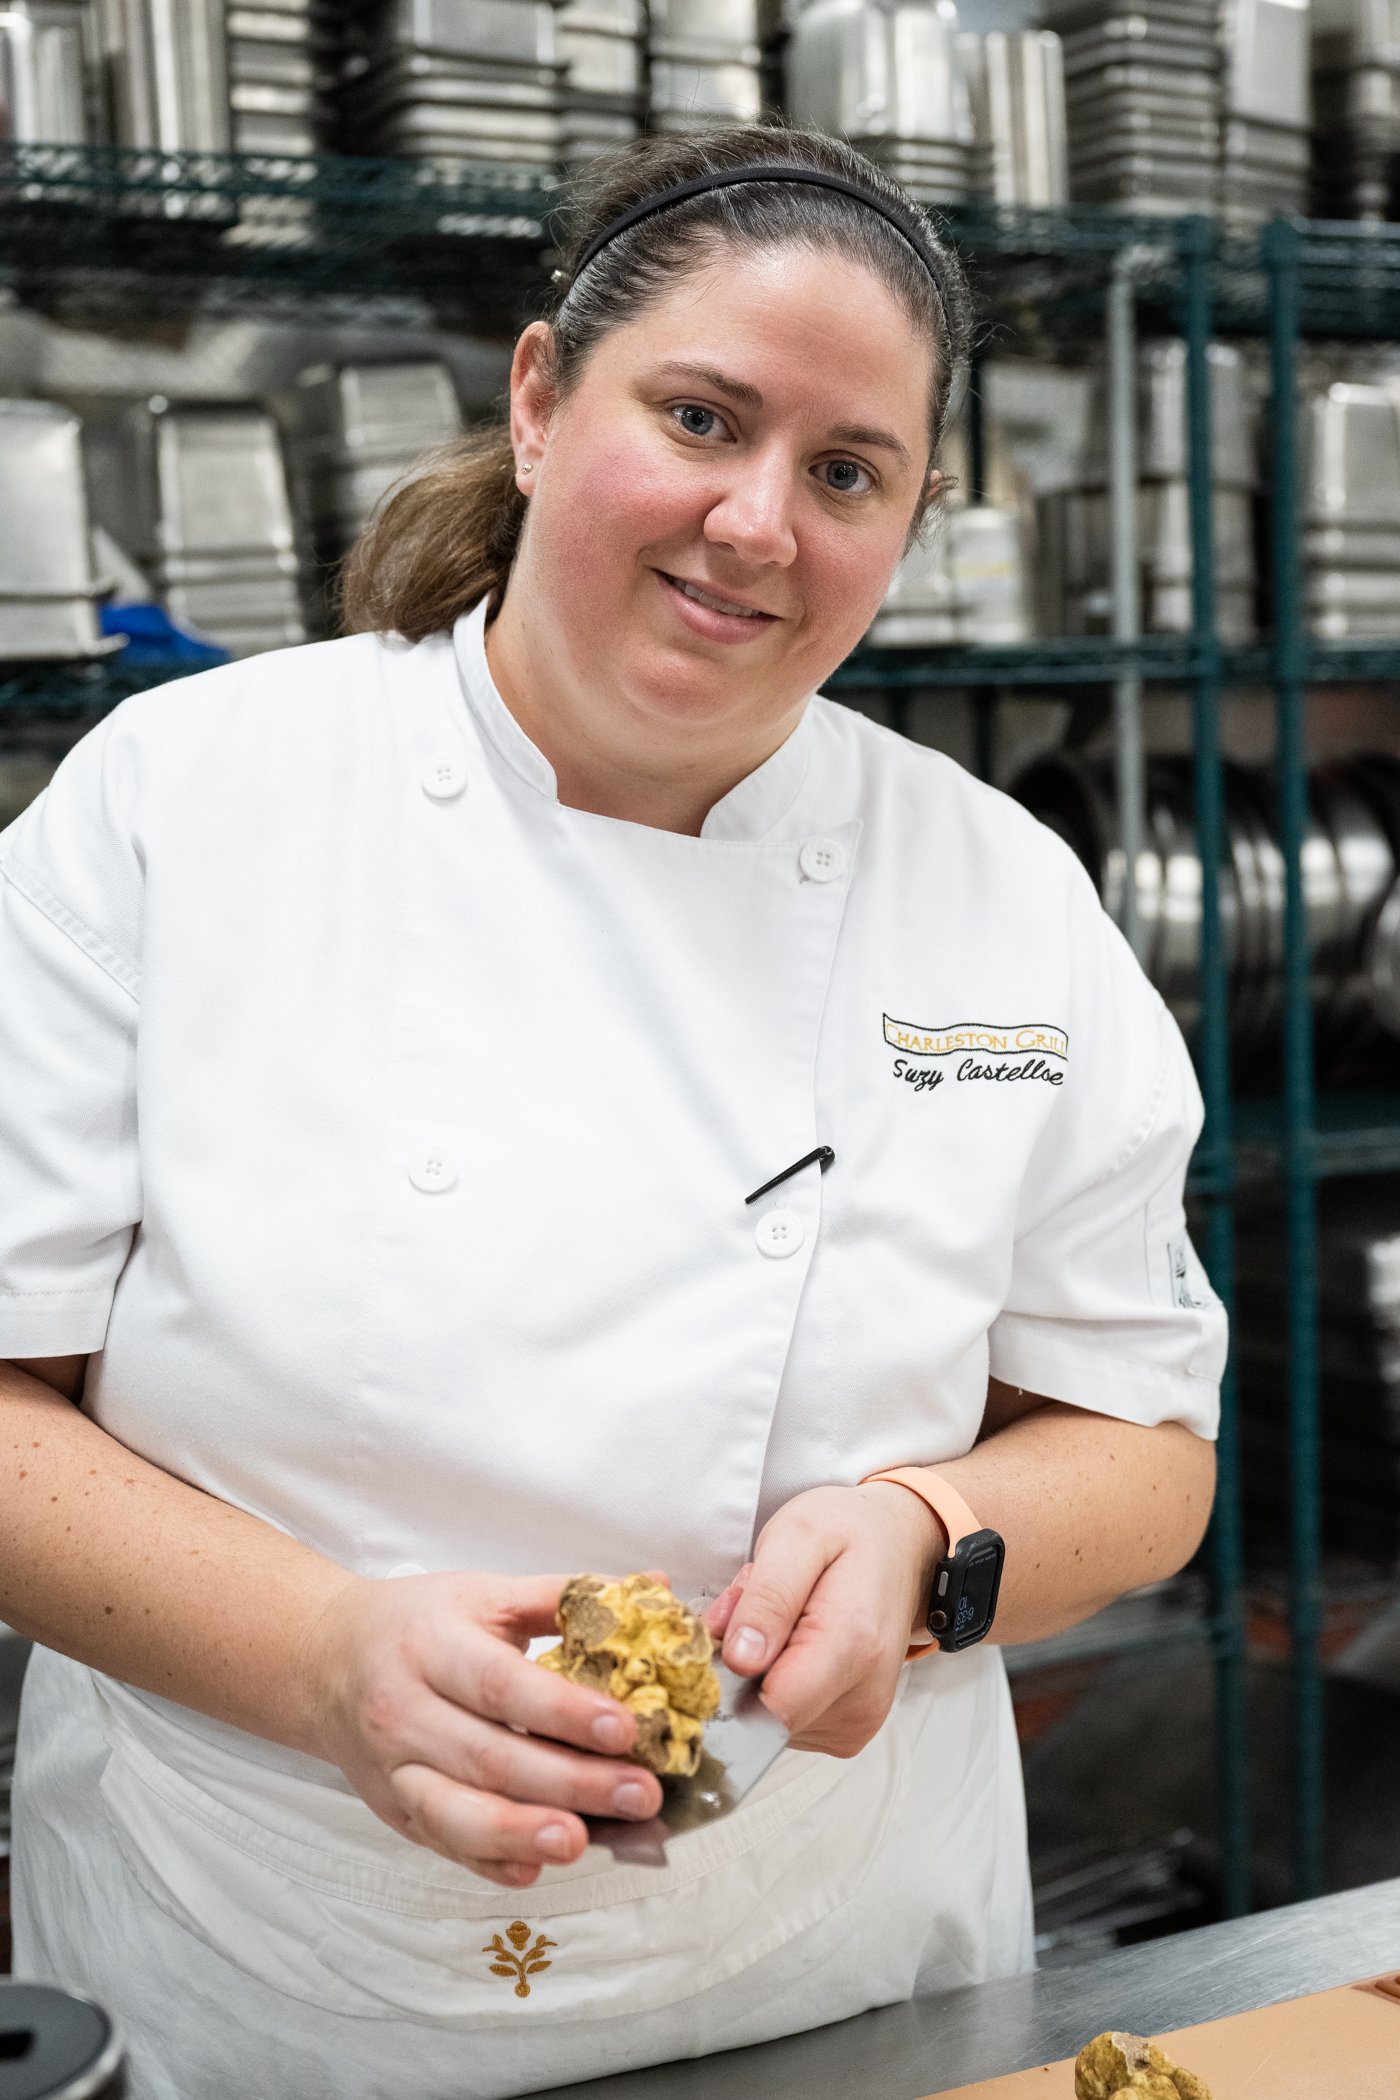 Charleston event photographer Reese Moore covered a special truffle dinner at the Charleston Place Hotel